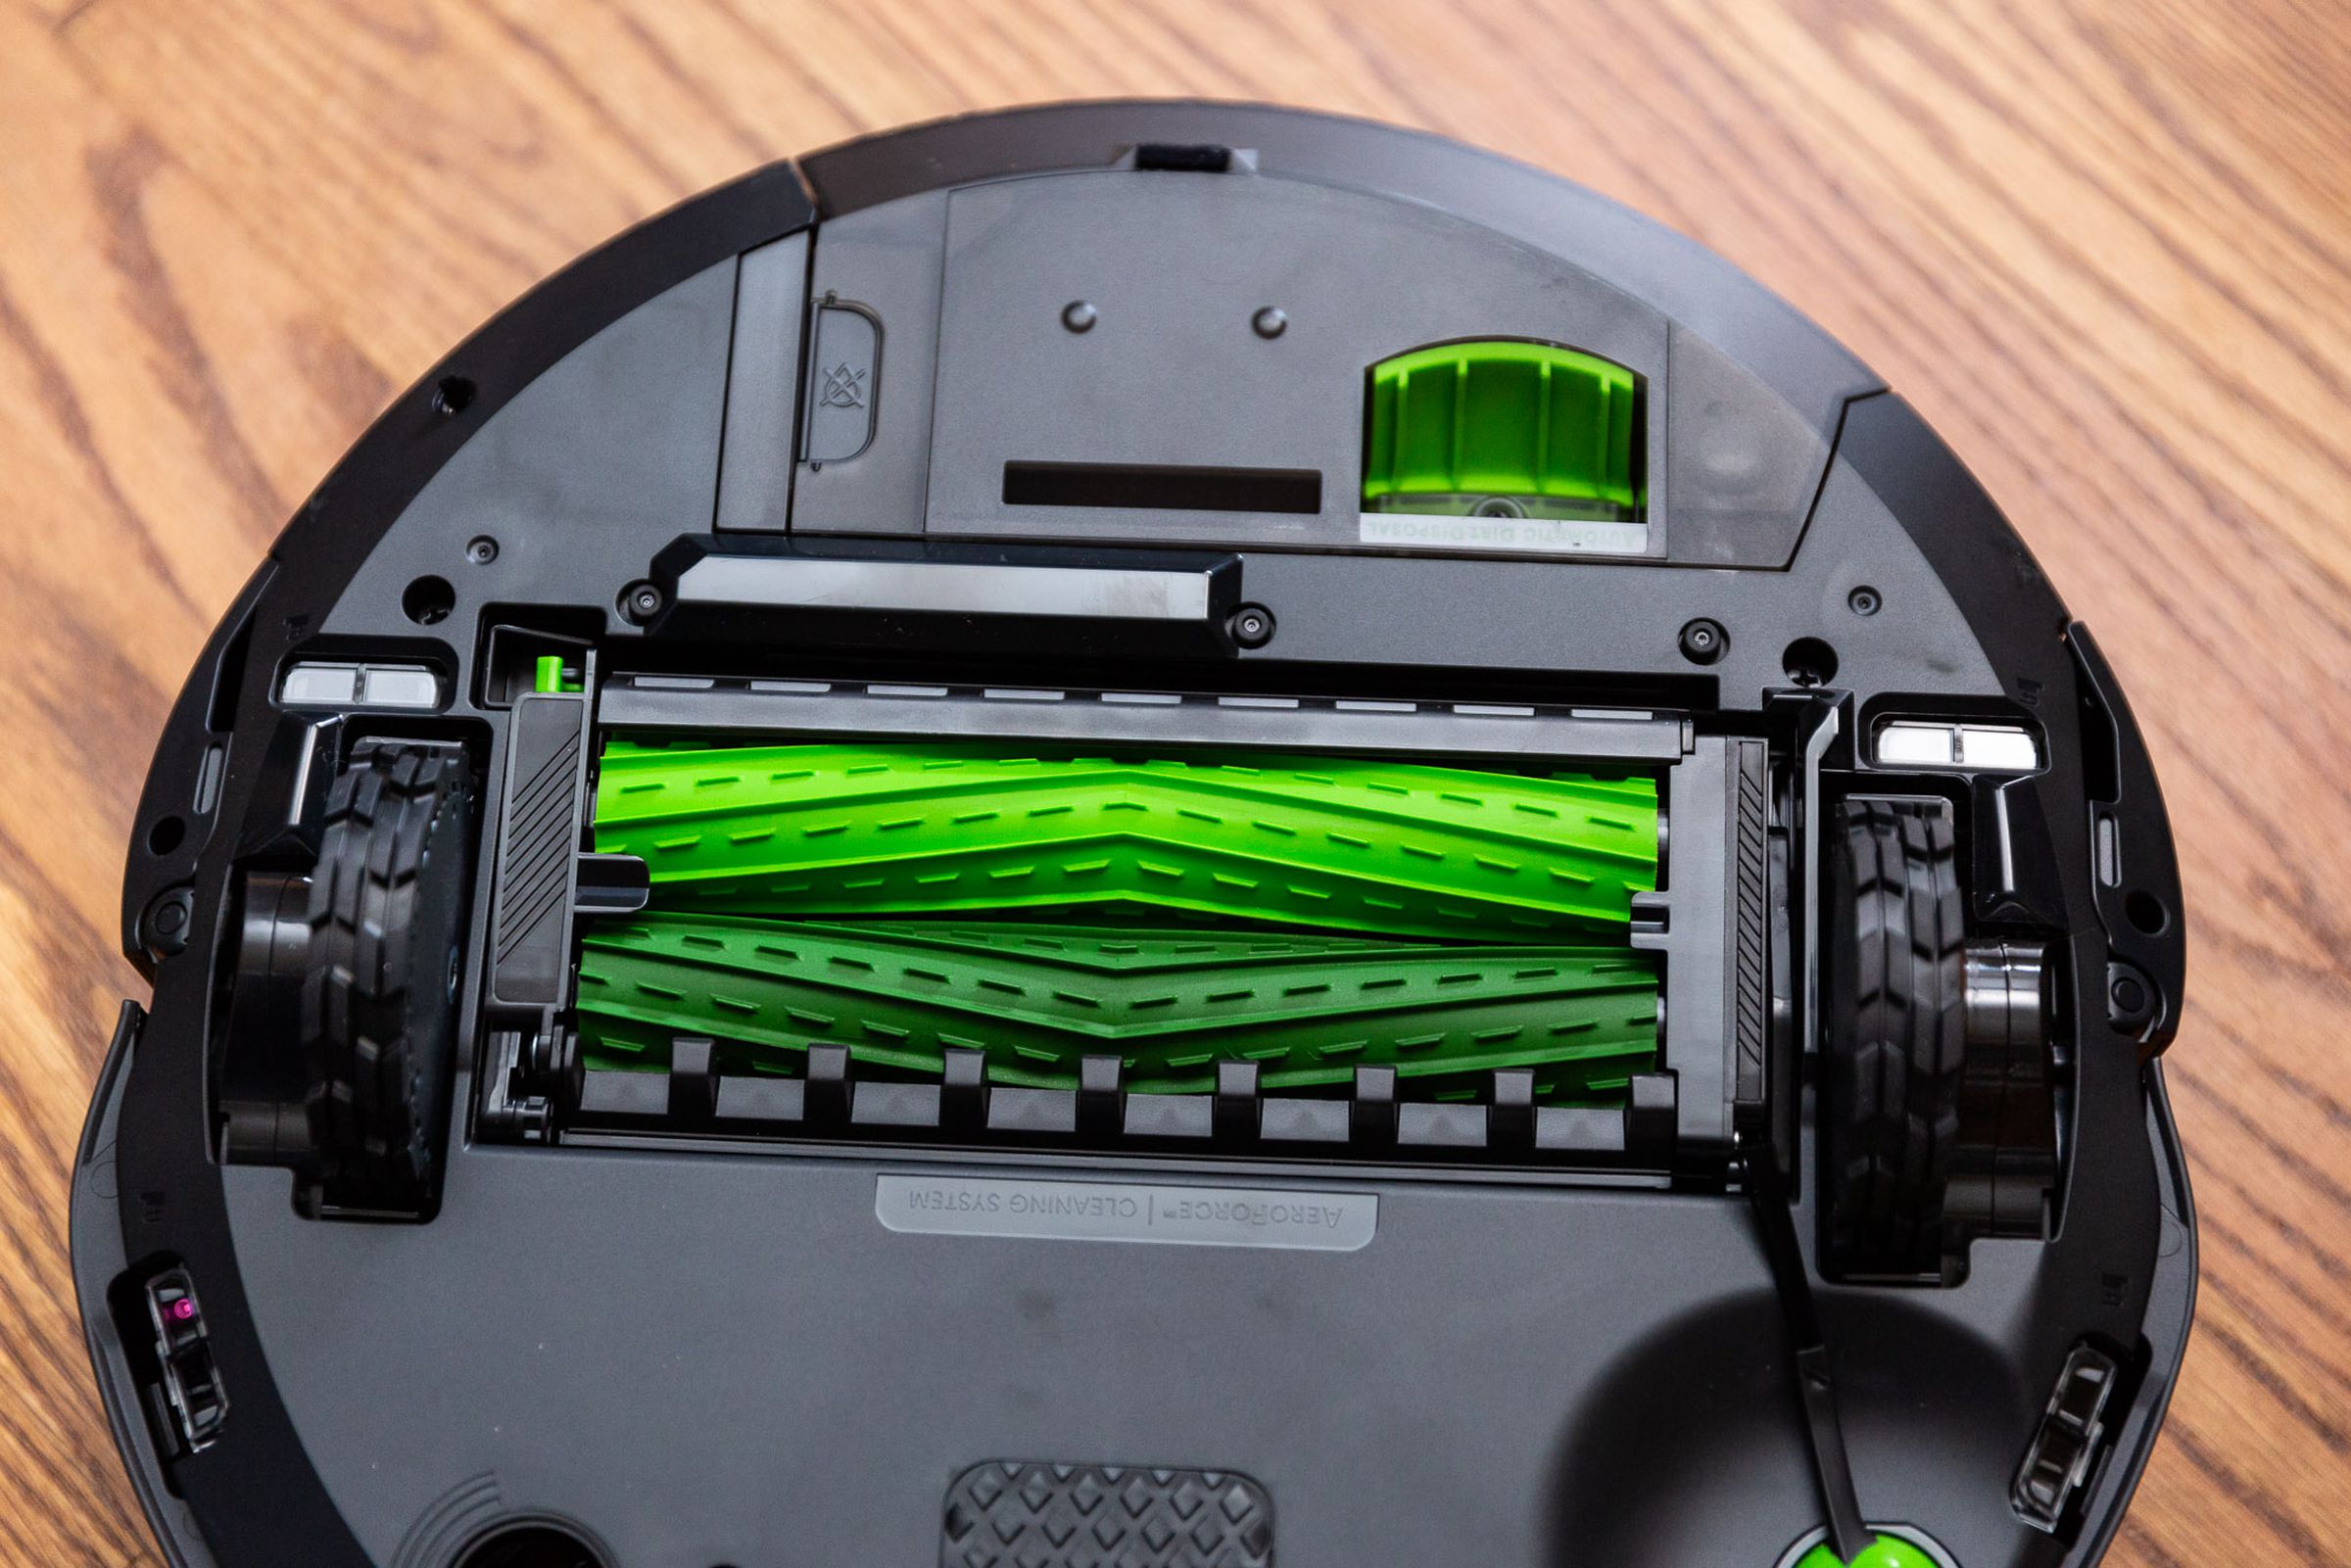 The underside of the Roomba Combo J7 showing its dual green floor rollers.